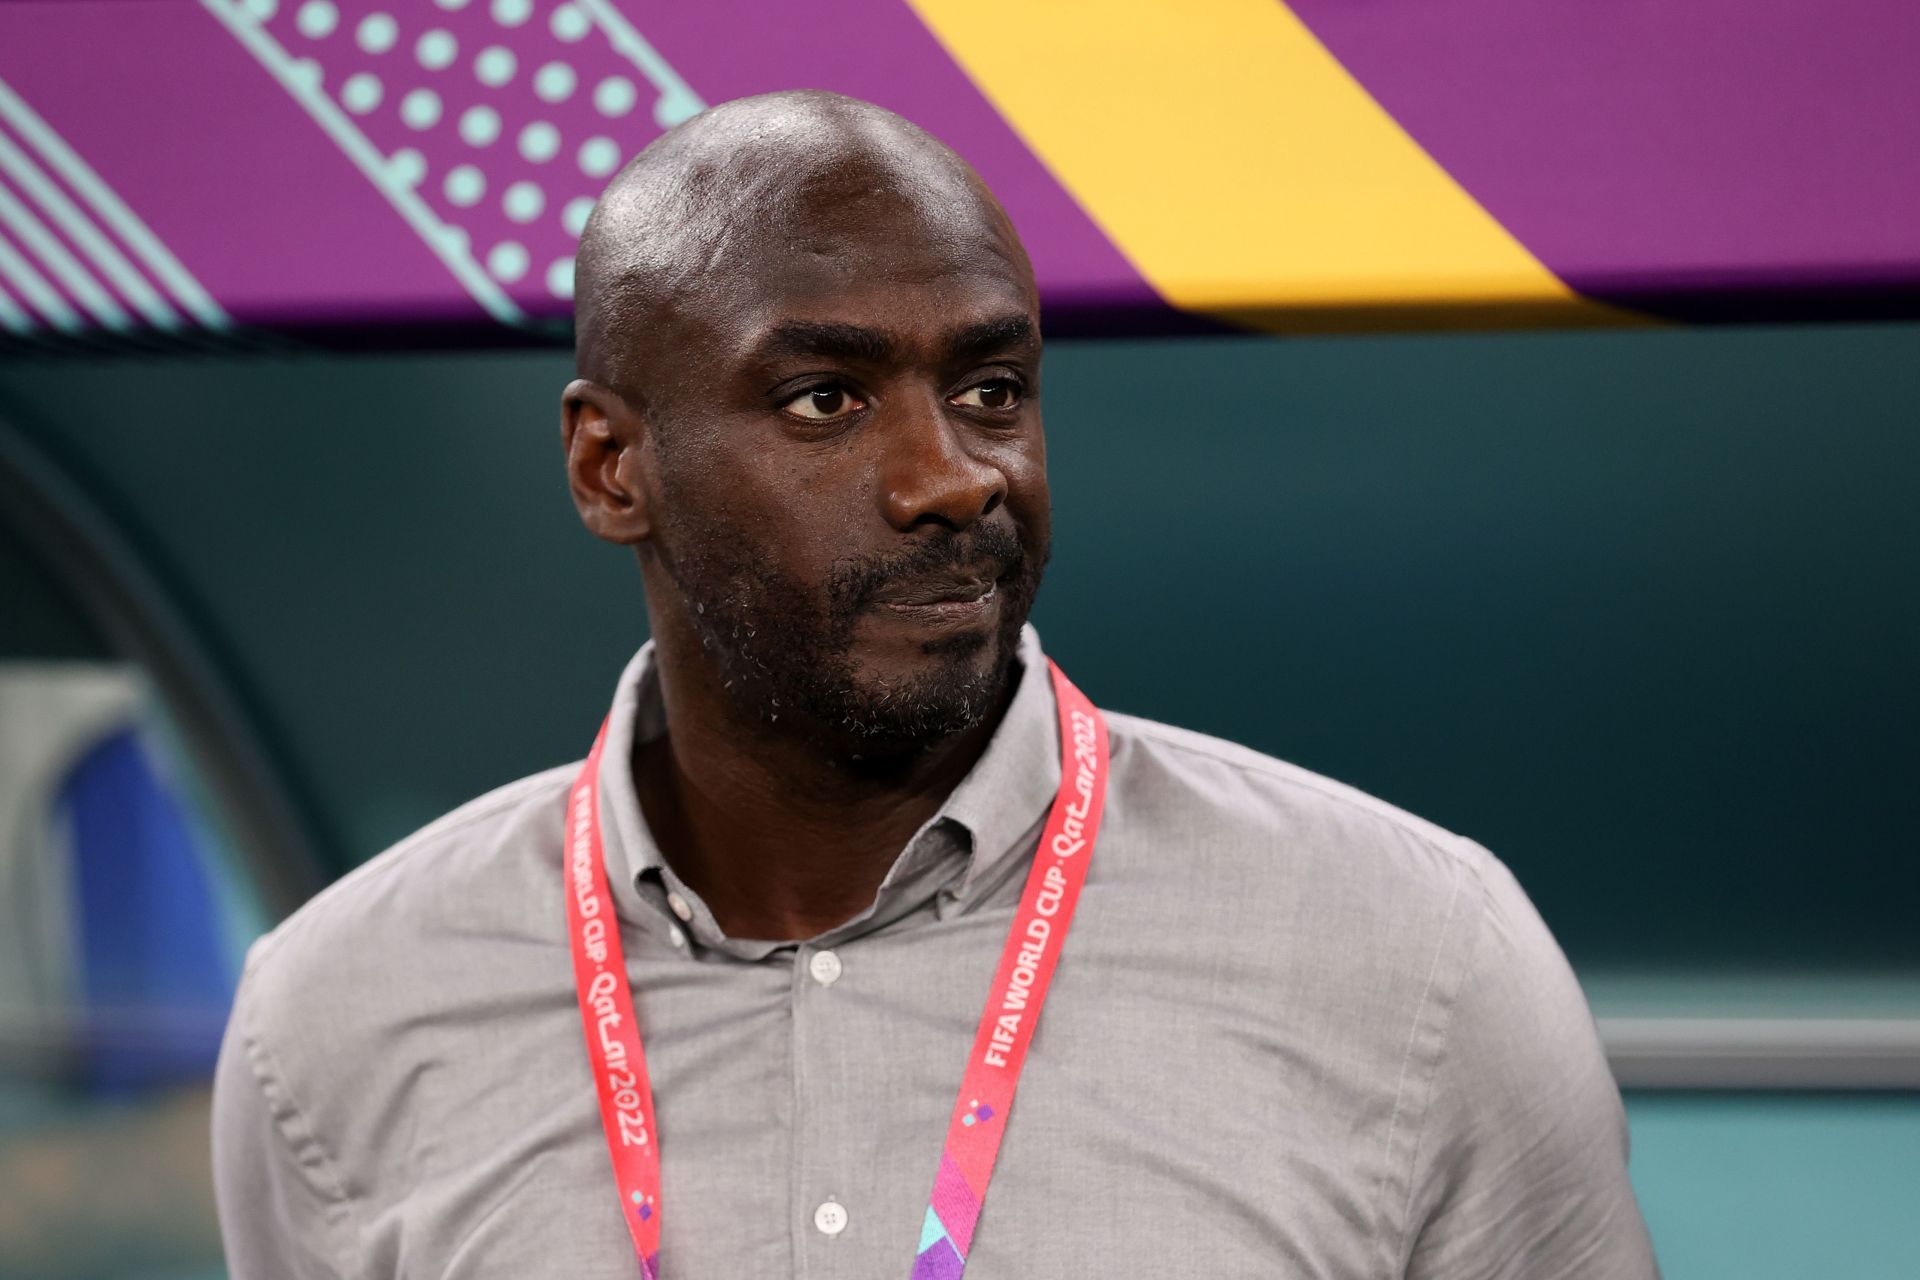 Ghana coach Otto Addo stepped down after their failure to qualify for the knockouts